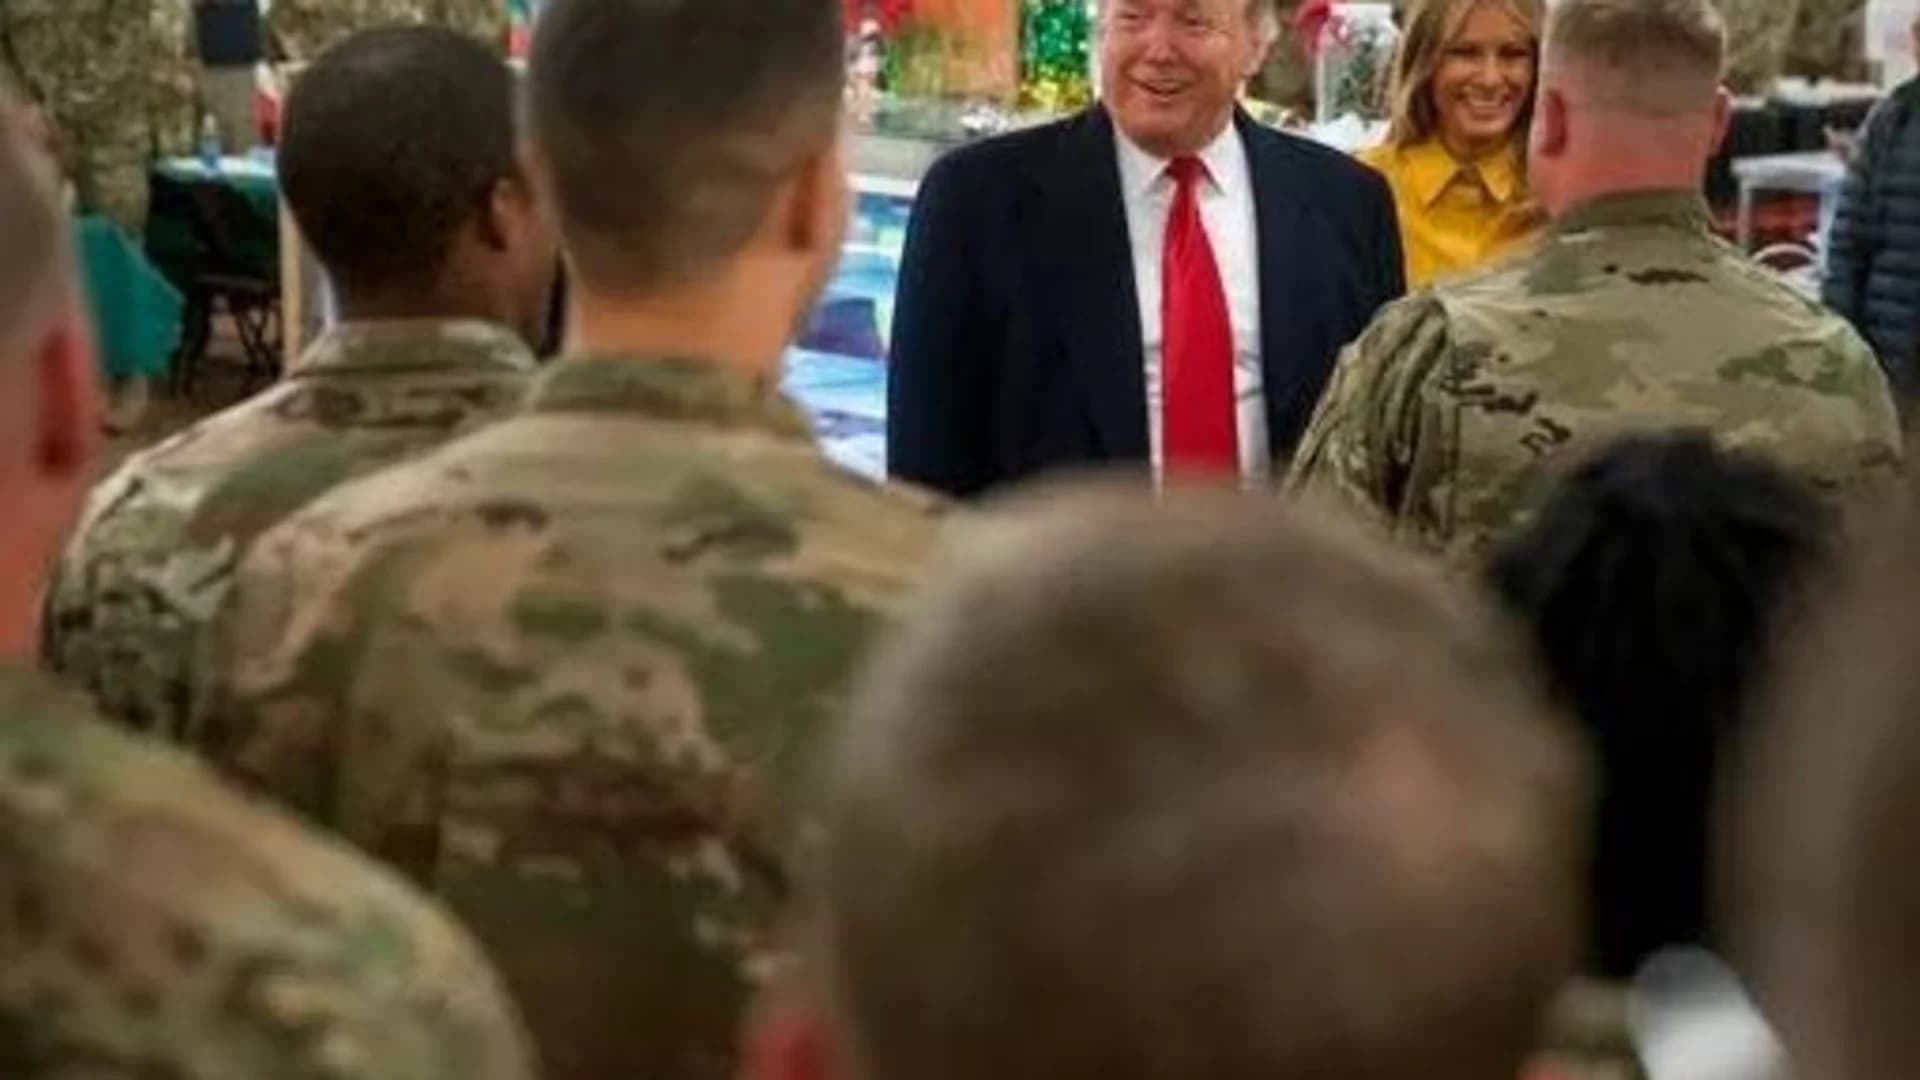 President Trump makes first visit to US troops in harm's way